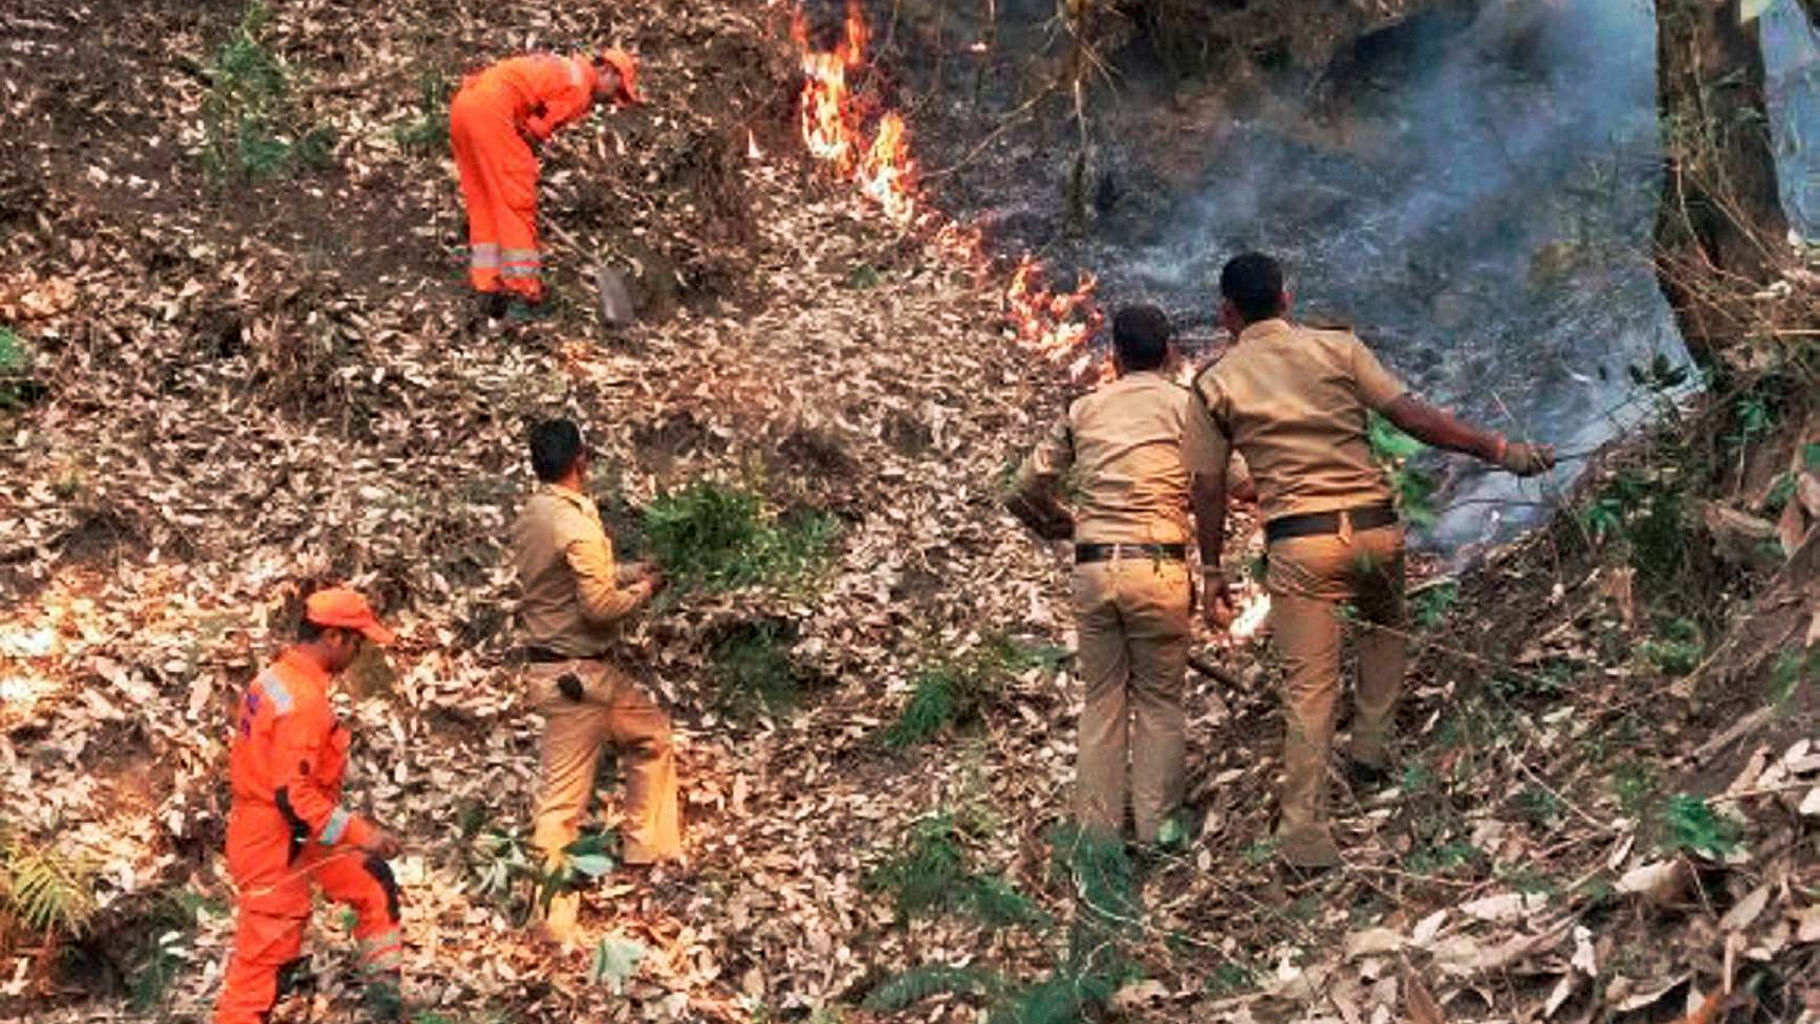 Forest officials extinguishing the fire in the forests at Kotdwar, Uttarakhand on Monday.(Photo: PTI)